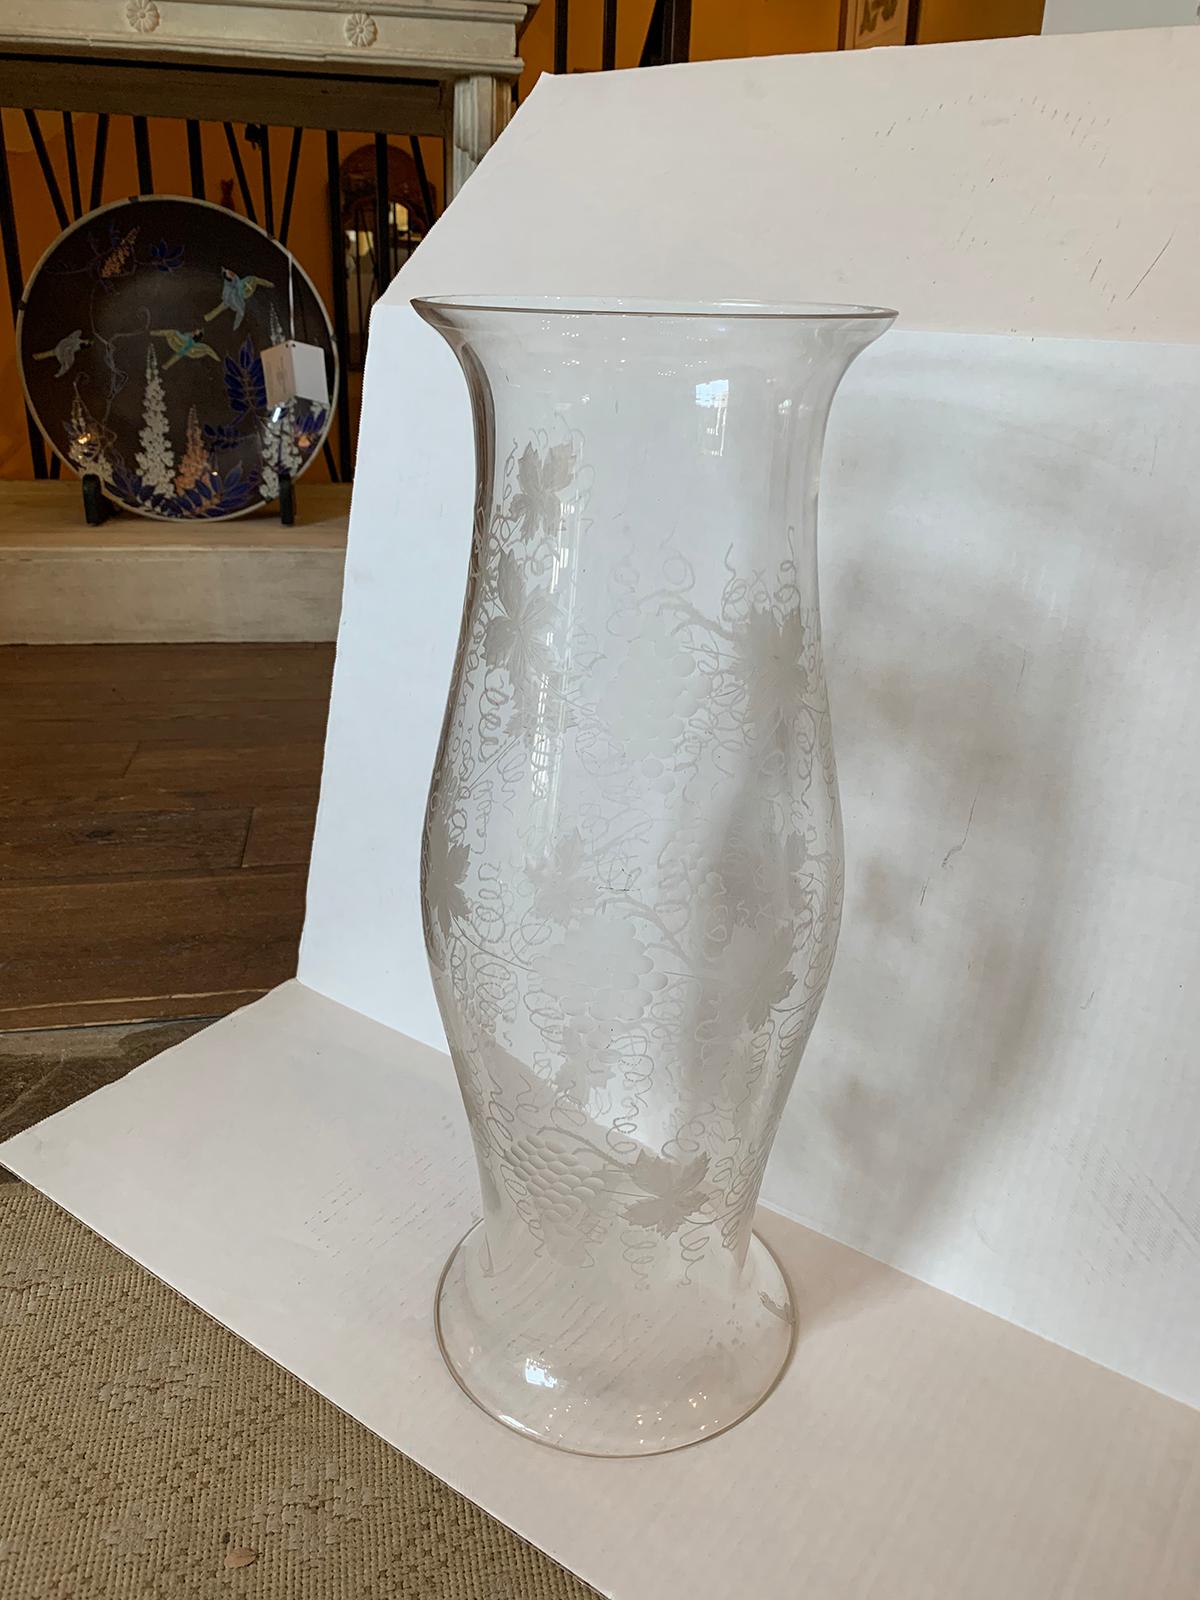 Large scale 19th century etched glass hurricane with grape leaf detail
Measures: Overall: 7.75